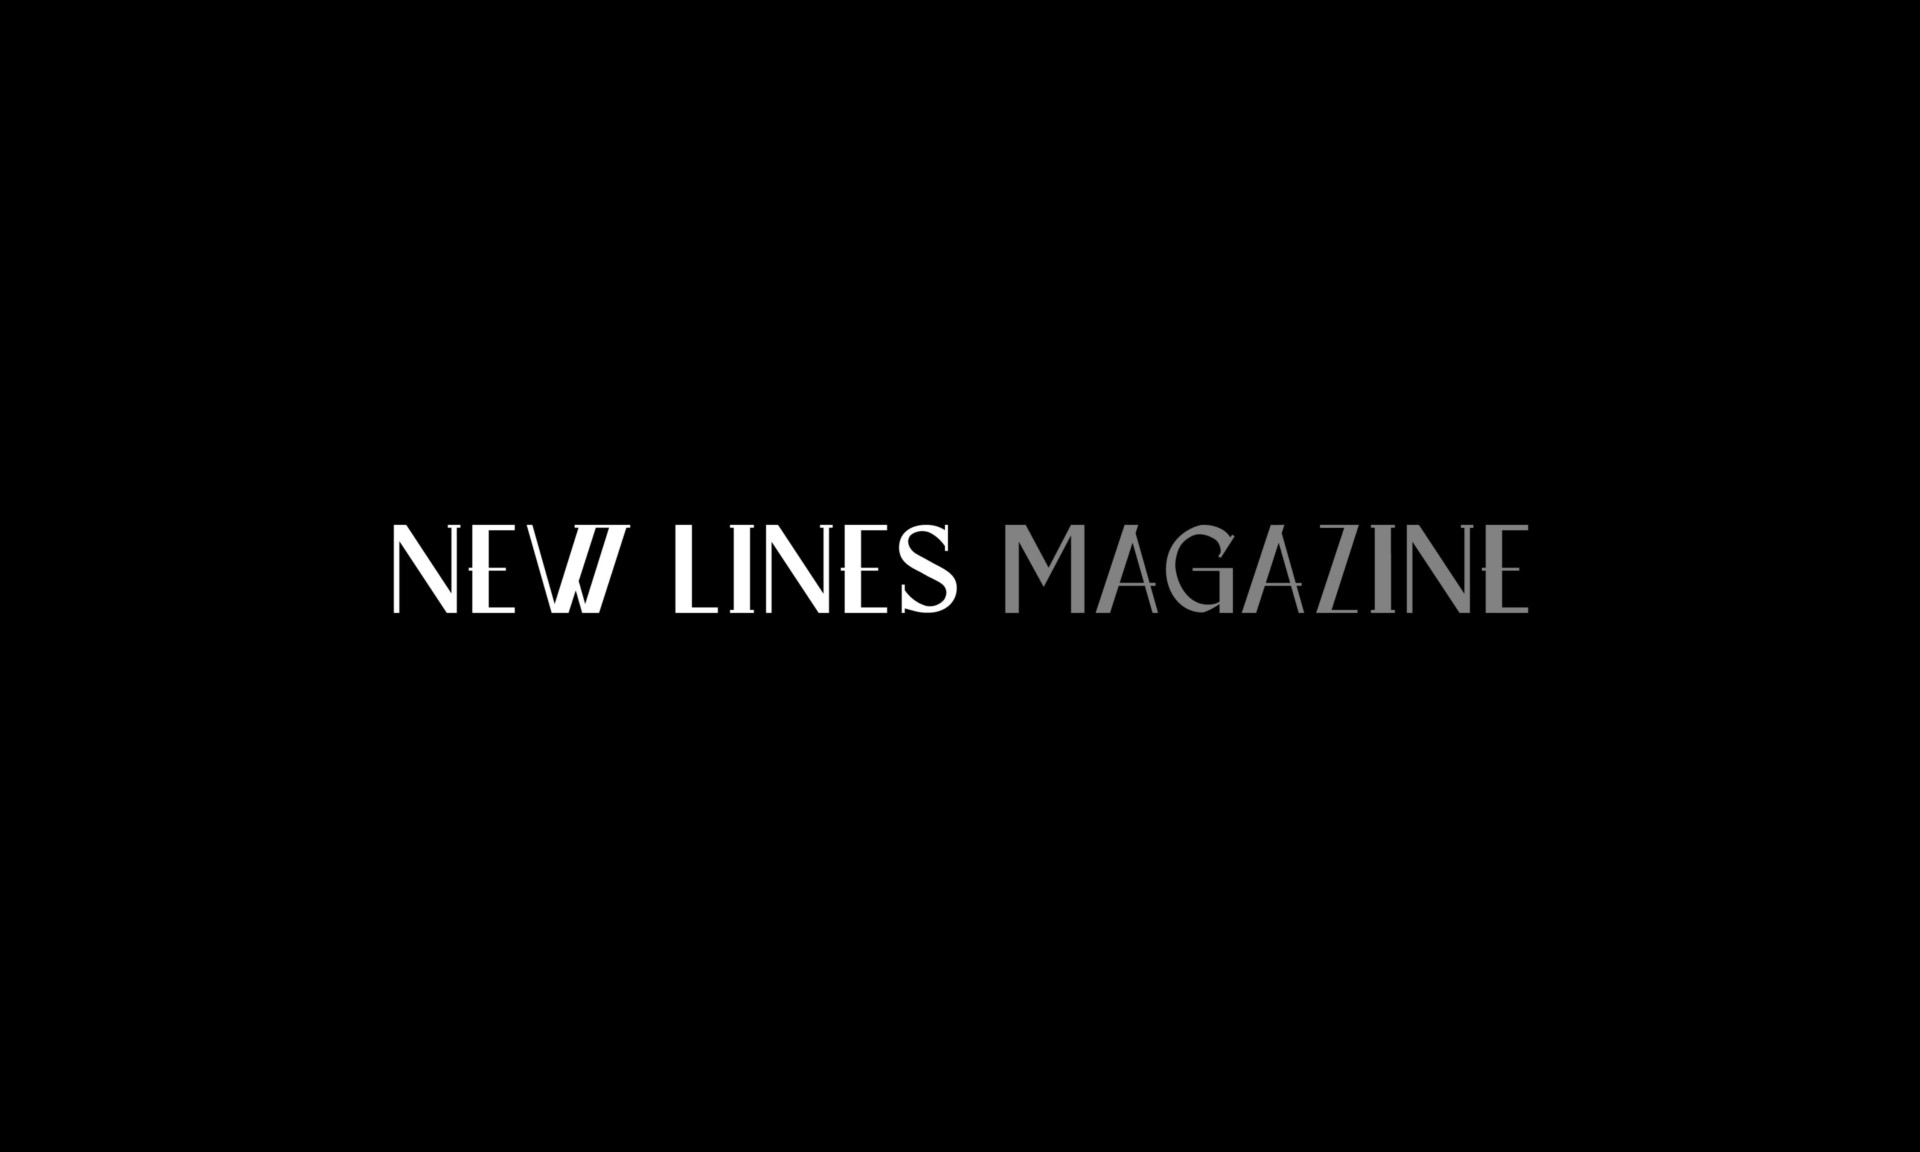 New Lines Broadens Its Horizons to Include the Whole World